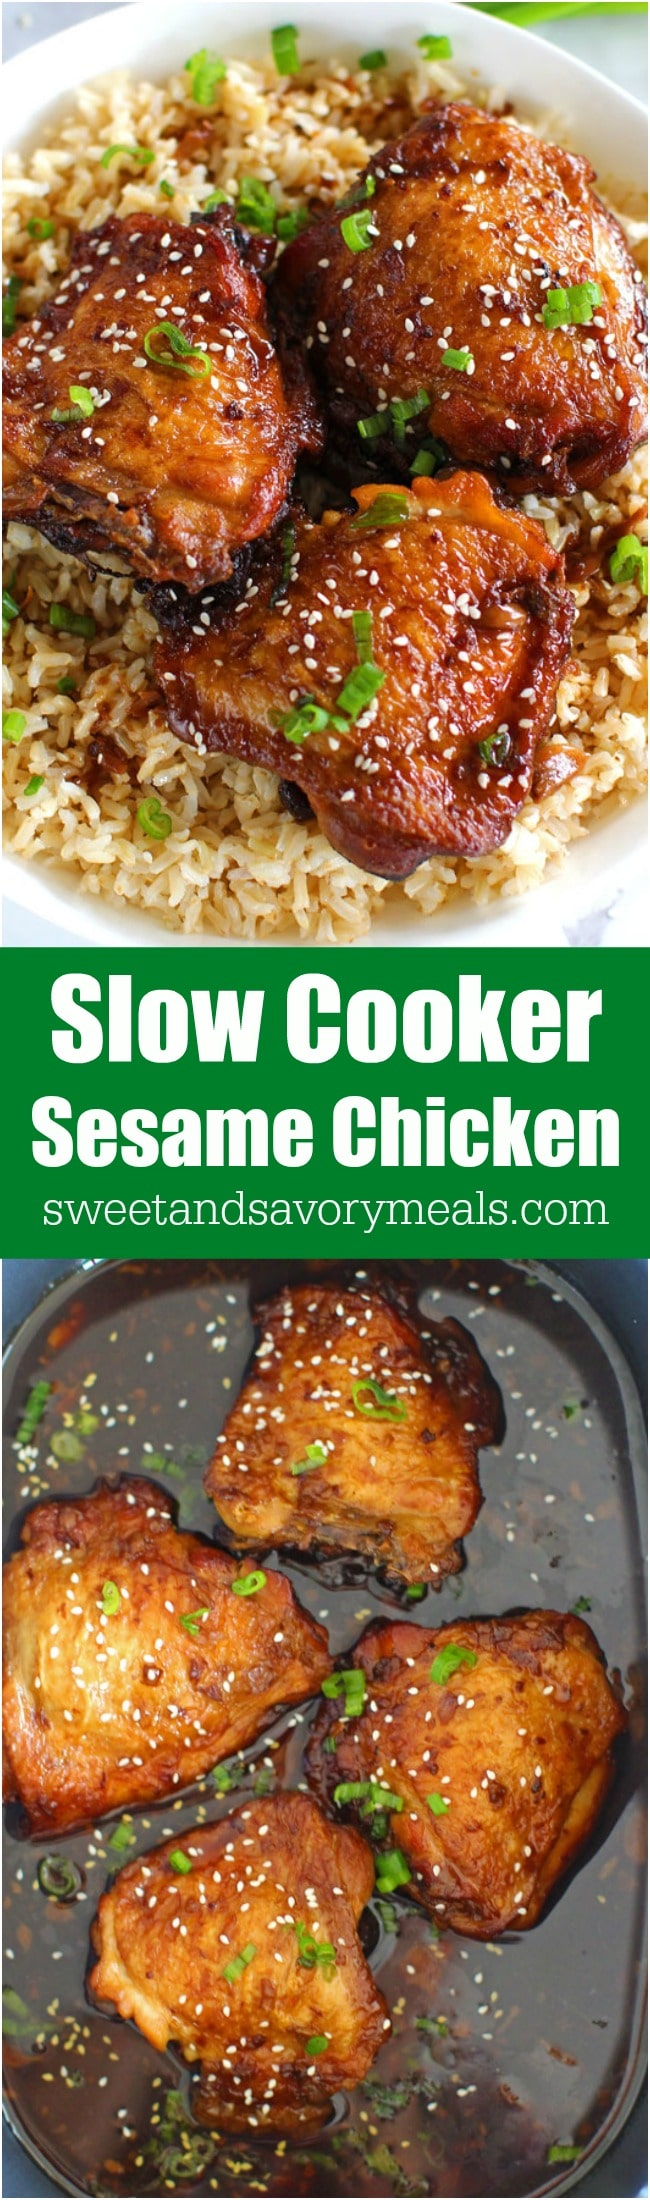 Slow Cooker Garlic Sesame Chicken - Sweet and Savory Meals